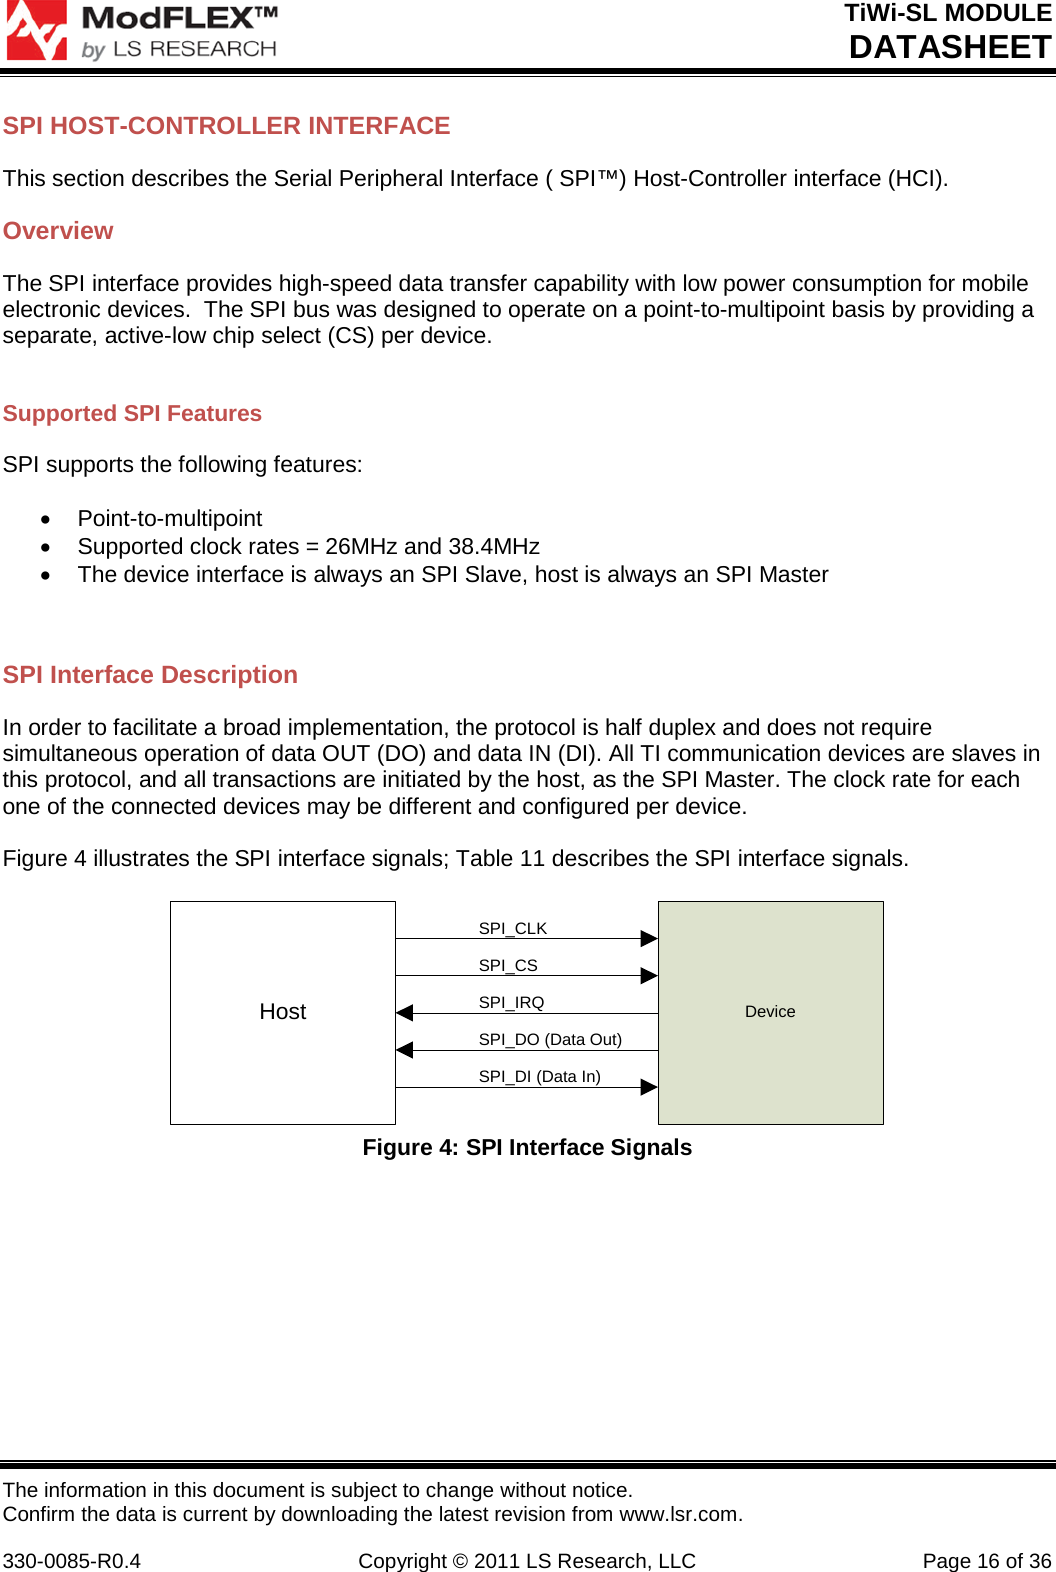 TiWi-SL MODULE DATASHEET The information in this document is subject to change without notice. Confirm the data is current by downloading the latest revision from www.lsr.com.  330-0085-R0.4 Copyright © 2011 LS Research, LLC Page 16 of 36 SPI HOST-CONTROLLER INTERFACE This section describes the Serial Peripheral Interface ( SPI™) Host-Controller interface (HCI).   Overview The SPI interface provides high-speed data transfer capability with low power consumption for mobile electronic devices.  The SPI bus was designed to operate on a point-to-multipoint basis by providing a separate, active-low chip select (CS) per device.  Supported SPI Features SPI supports the following features:  • Point-to-multipoint • Supported clock rates = 26MHz and 38.4MHz • The device interface is always an SPI Slave, host is always an SPI Master  SPI Interface Description In order to facilitate a broad implementation, the protocol is half duplex and does not require simultaneous operation of data OUT (DO) and data IN (DI). All TI communication devices are slaves in this protocol, and all transactions are initiated by the host, as the SPI Master. The clock rate for each one of the connected devices may be different and configured per device.  Figure 4 illustrates the SPI interface signals; Table 11 describes the SPI interface signals.  Host DeviceSPI_CLKSPI_CSSPI_IRQSPI_DO (Data Out)SPI_DI (Data In) Figure 4: SPI Interface Signals      